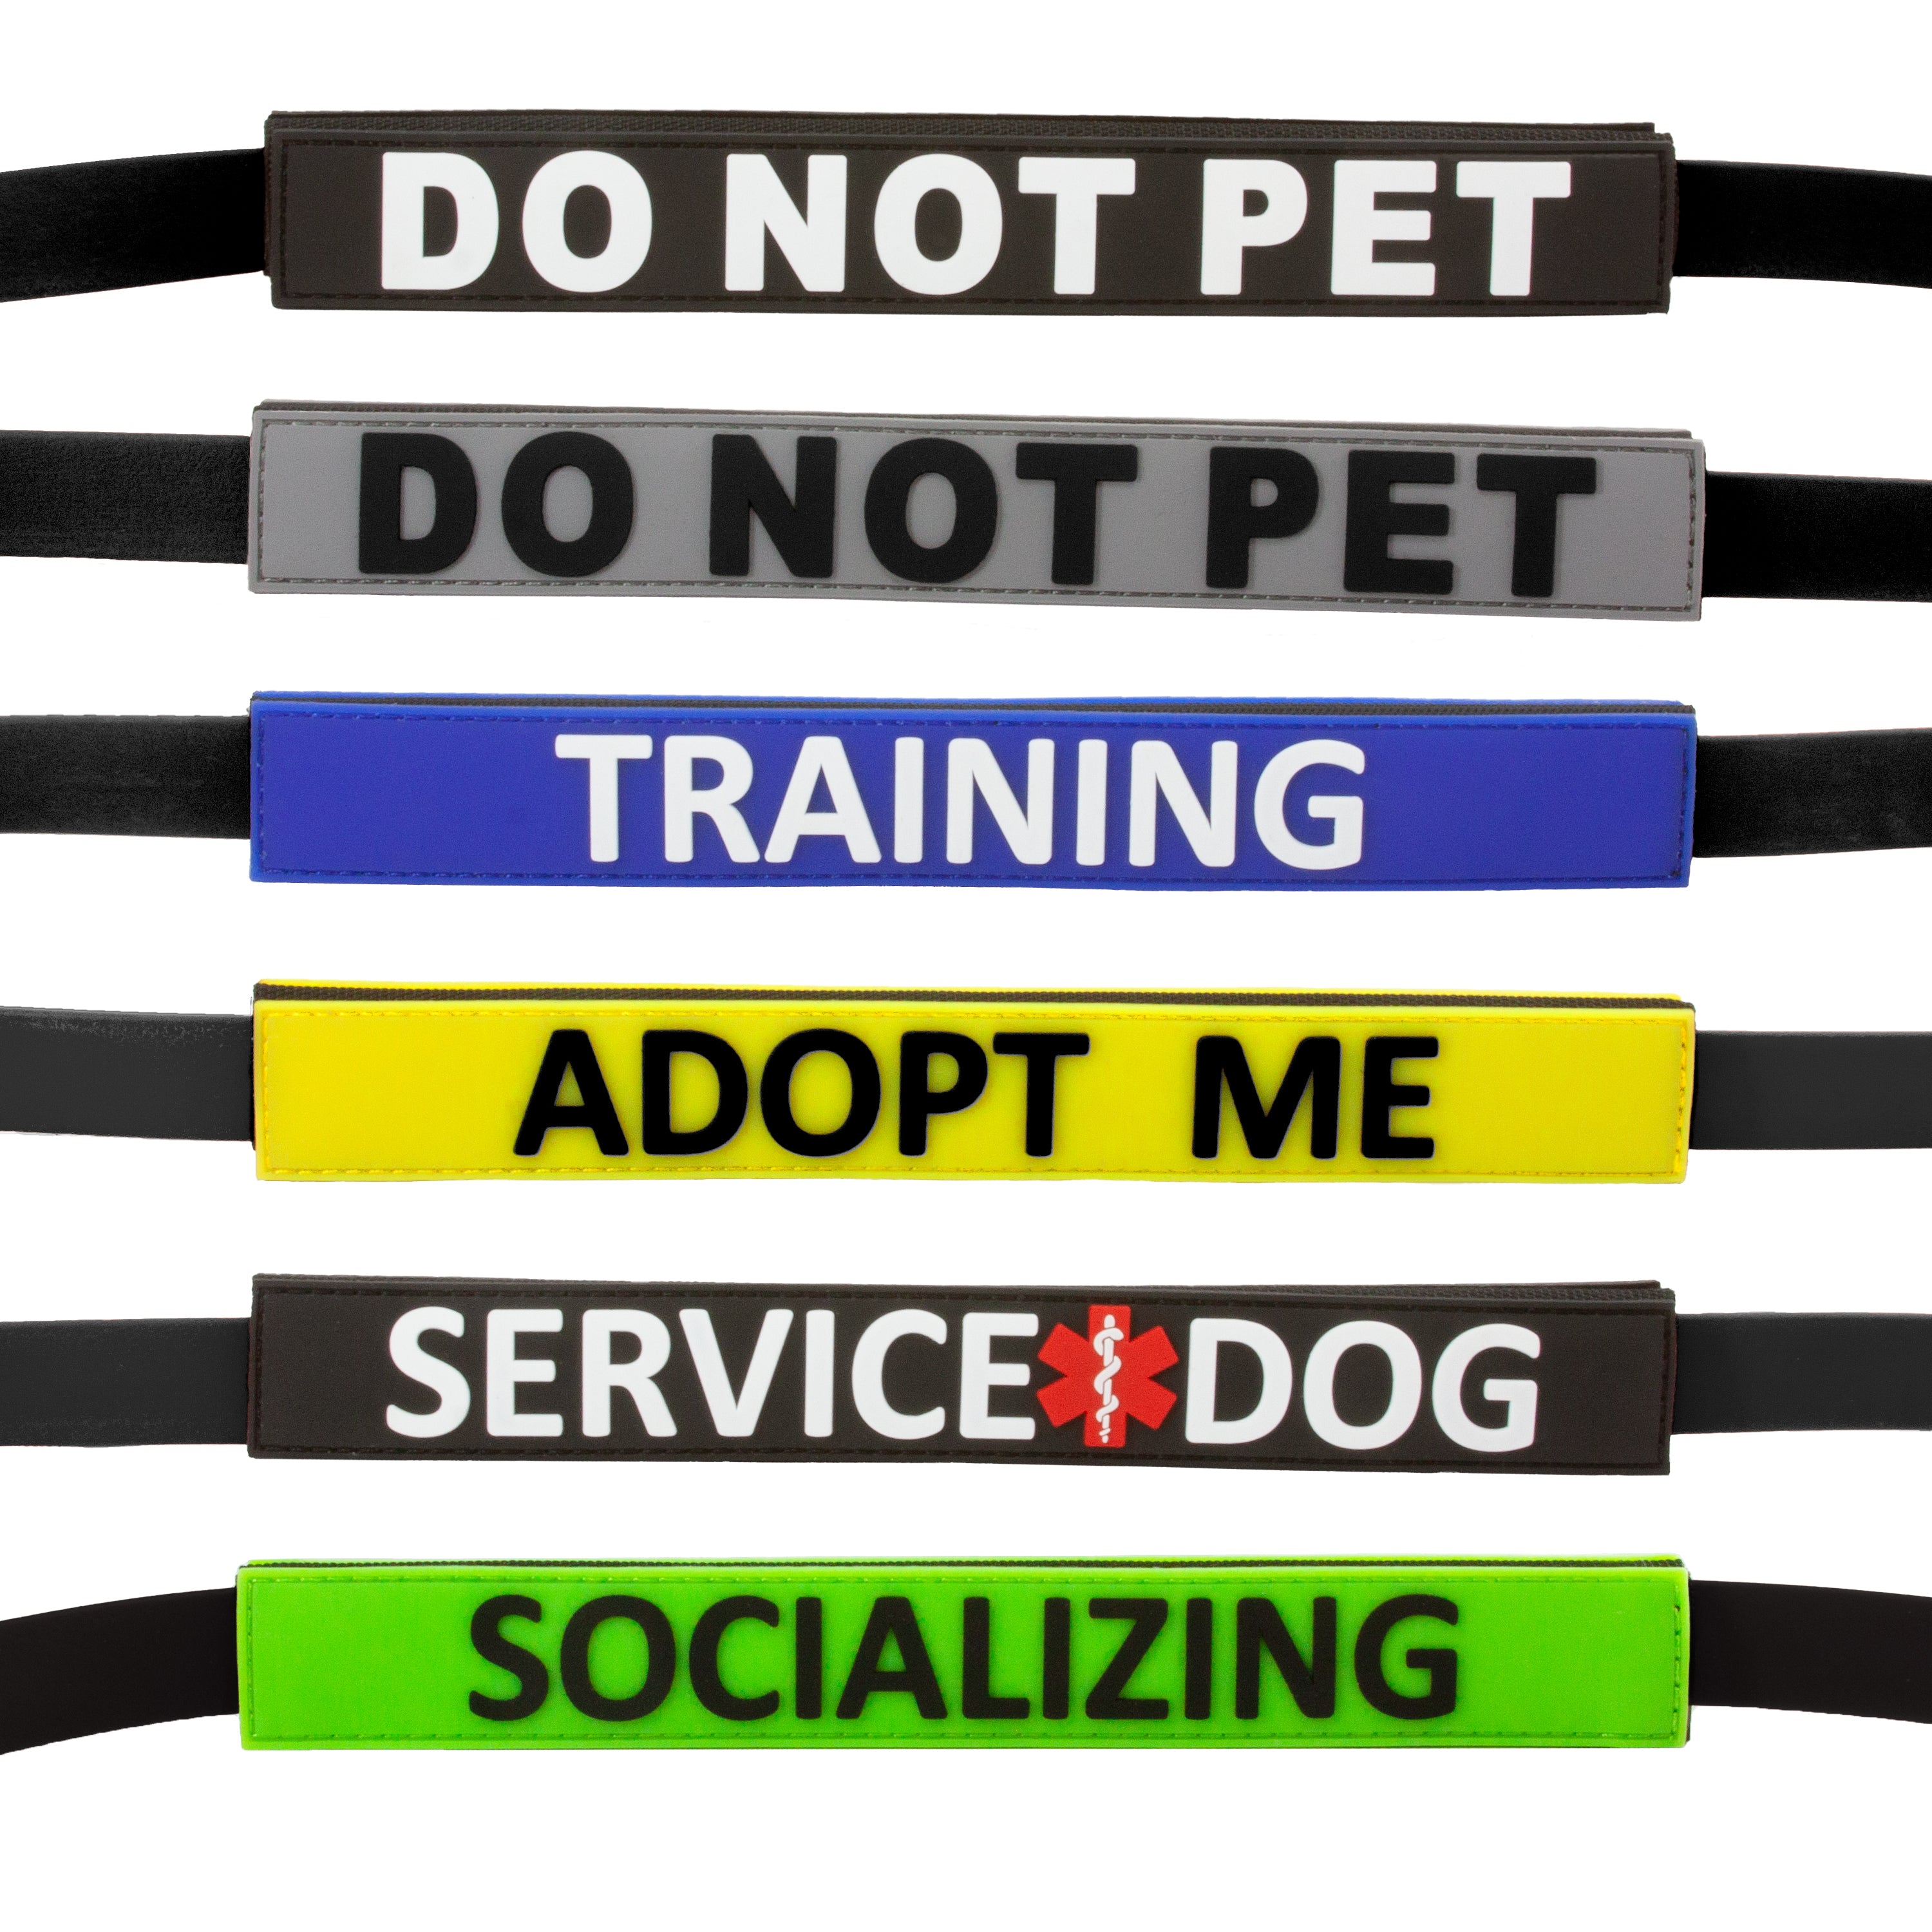 Dog leash sleeve, working dogs, reactive dogs, training dogs, dogs that need space.